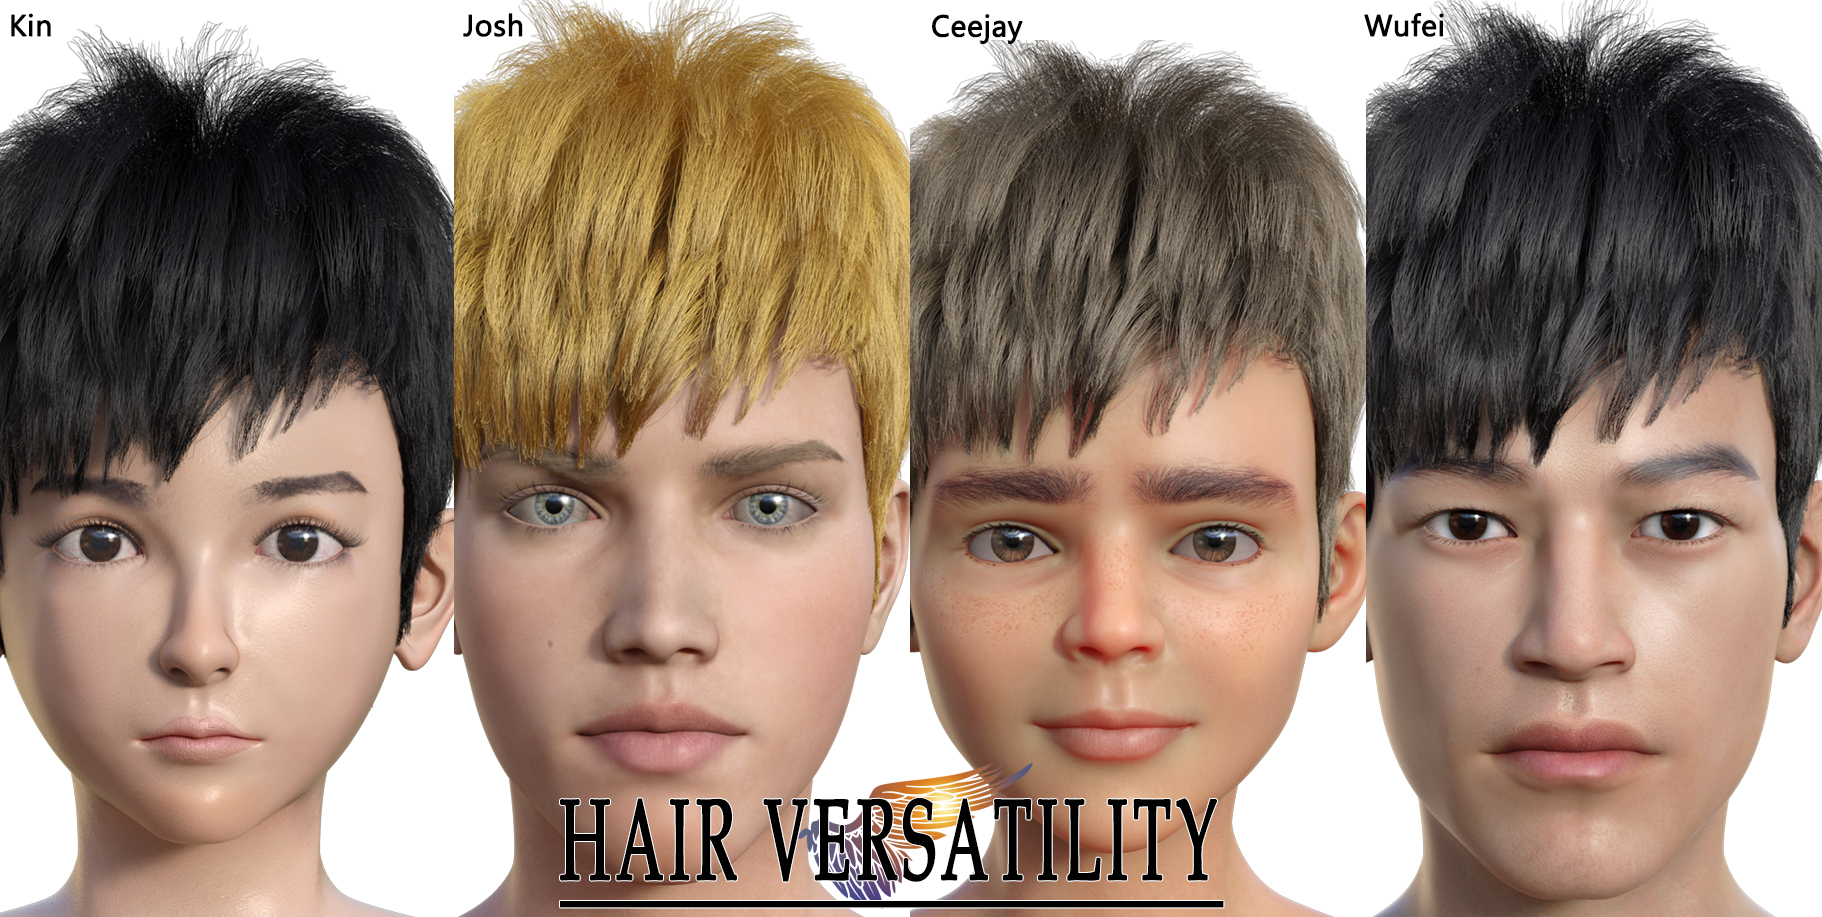 Kin Character and dForce Kin Hair for Genesis 8 Males by: Panda, 3D Models by Daz 3D